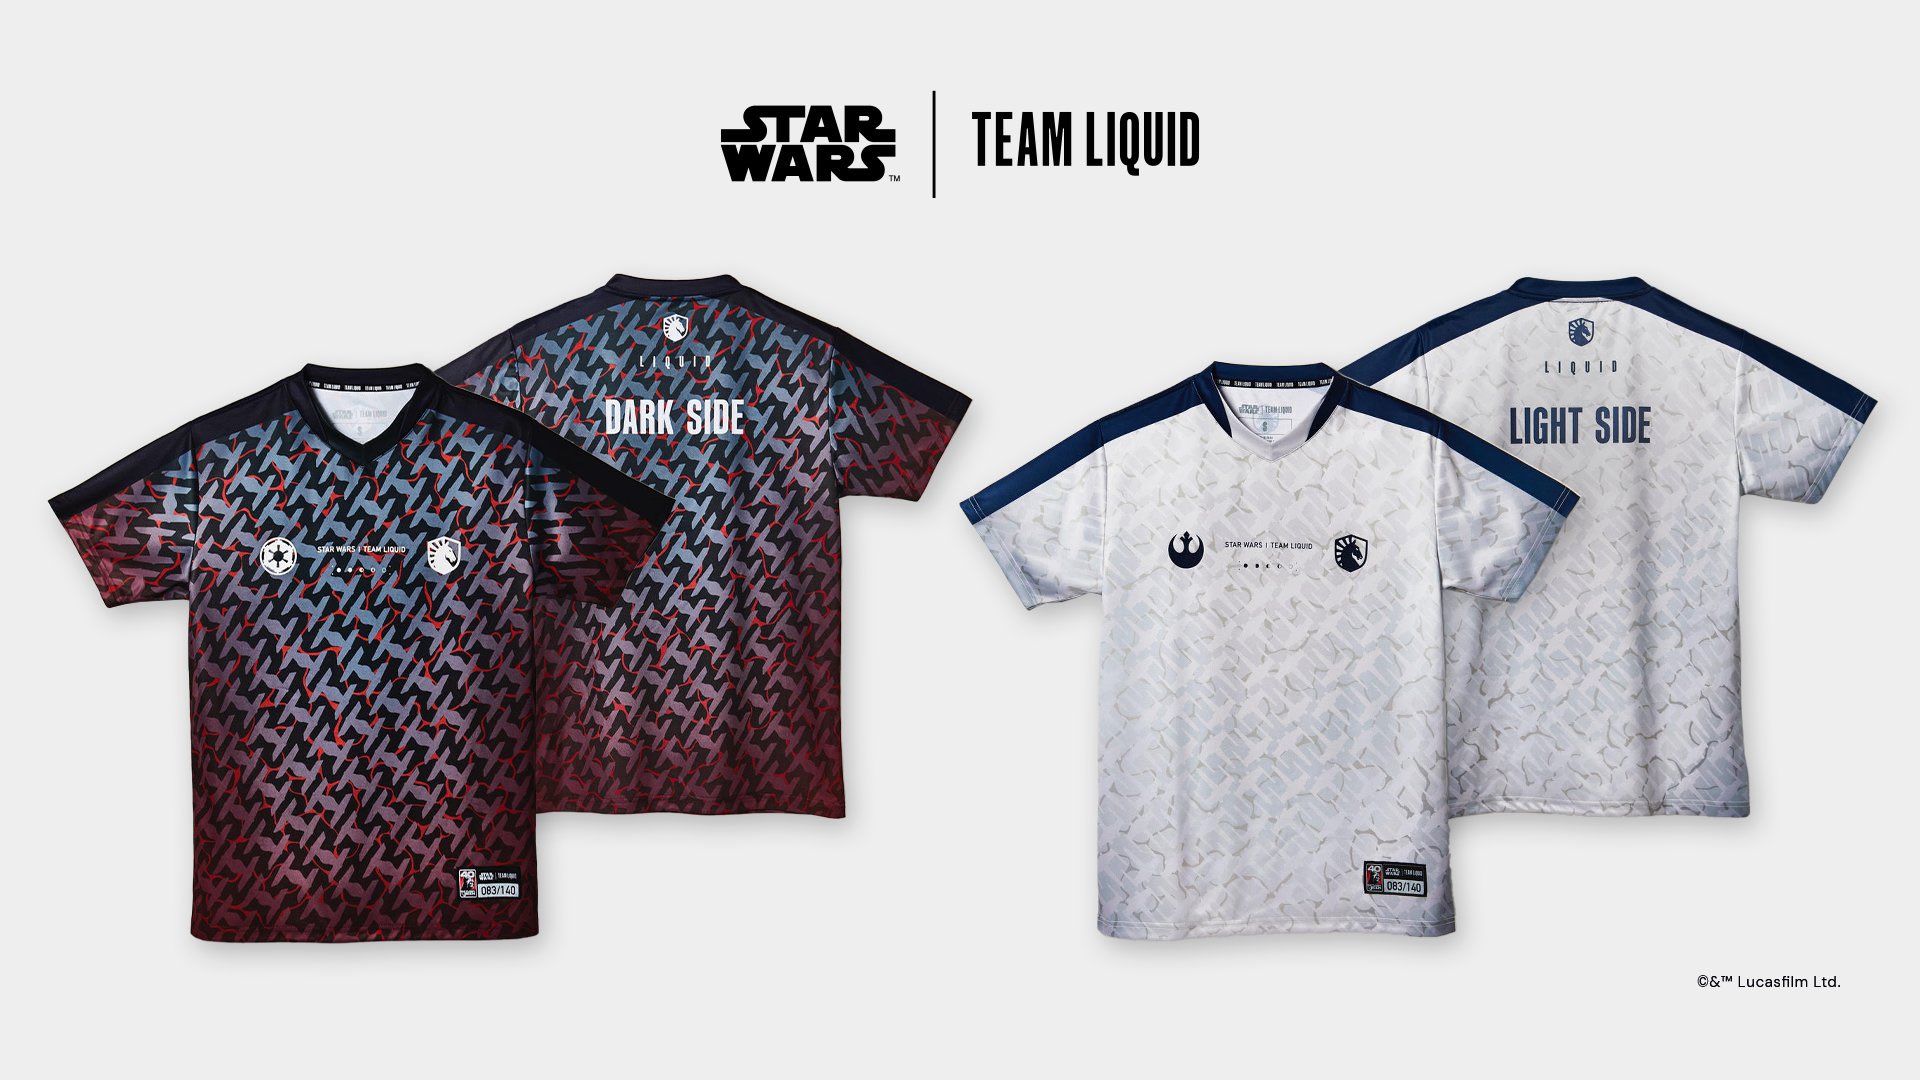 Damian Estrada on X: Our Star Wars  Team Liquid drop is extremely  limited! 140 jersey of each divided across NA, BR, and EU. 280 total jerseys.  Individually serialized to celebrate the